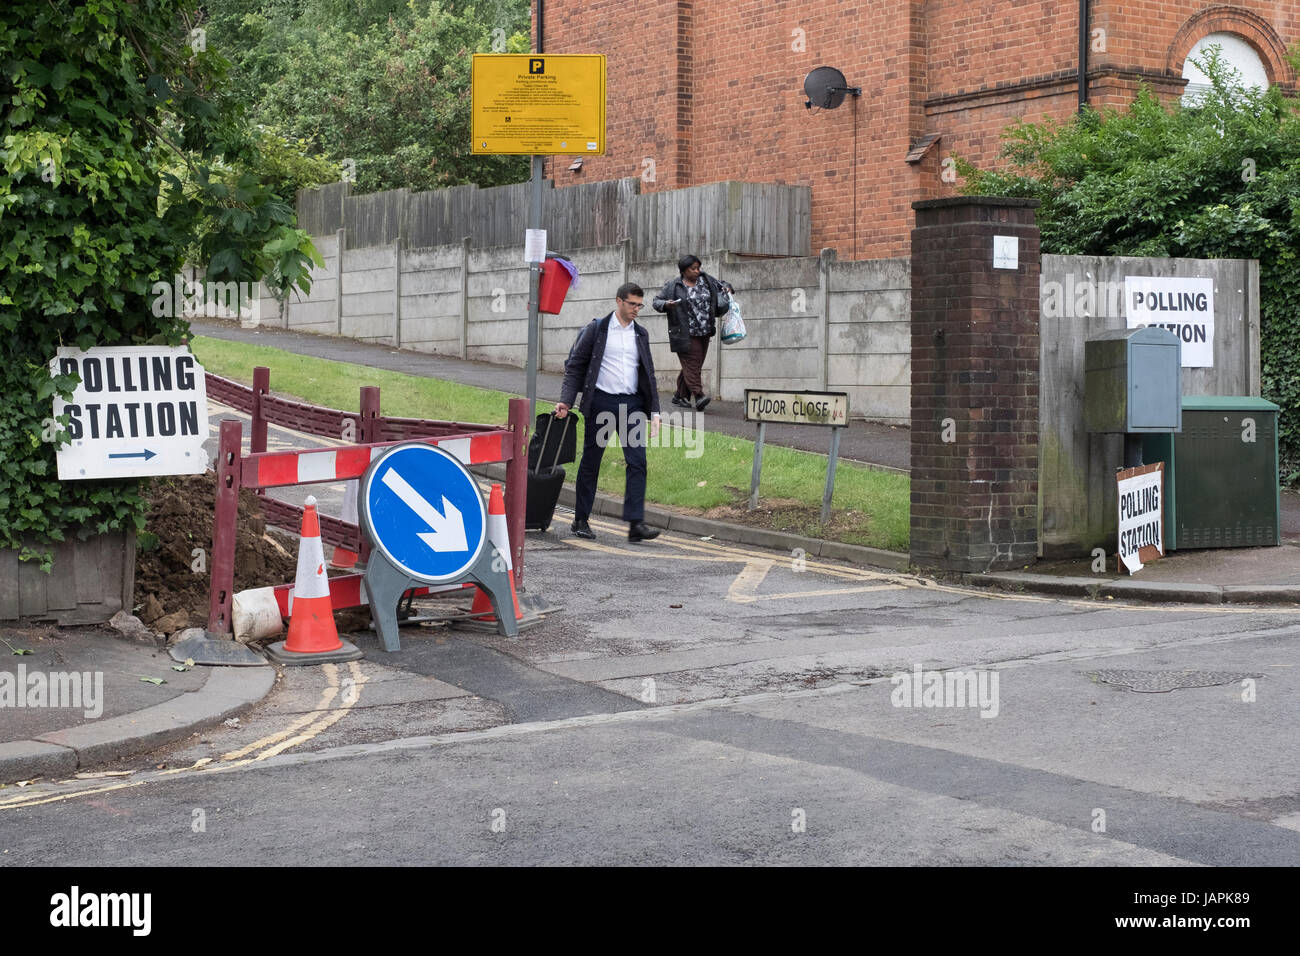 Haringey, London, UK. 8th June, 2017. Voters pass signs leading to a Haringey portable polling station, London, UK Credit: Thomas Carver/Alamy Live News Stock Photo